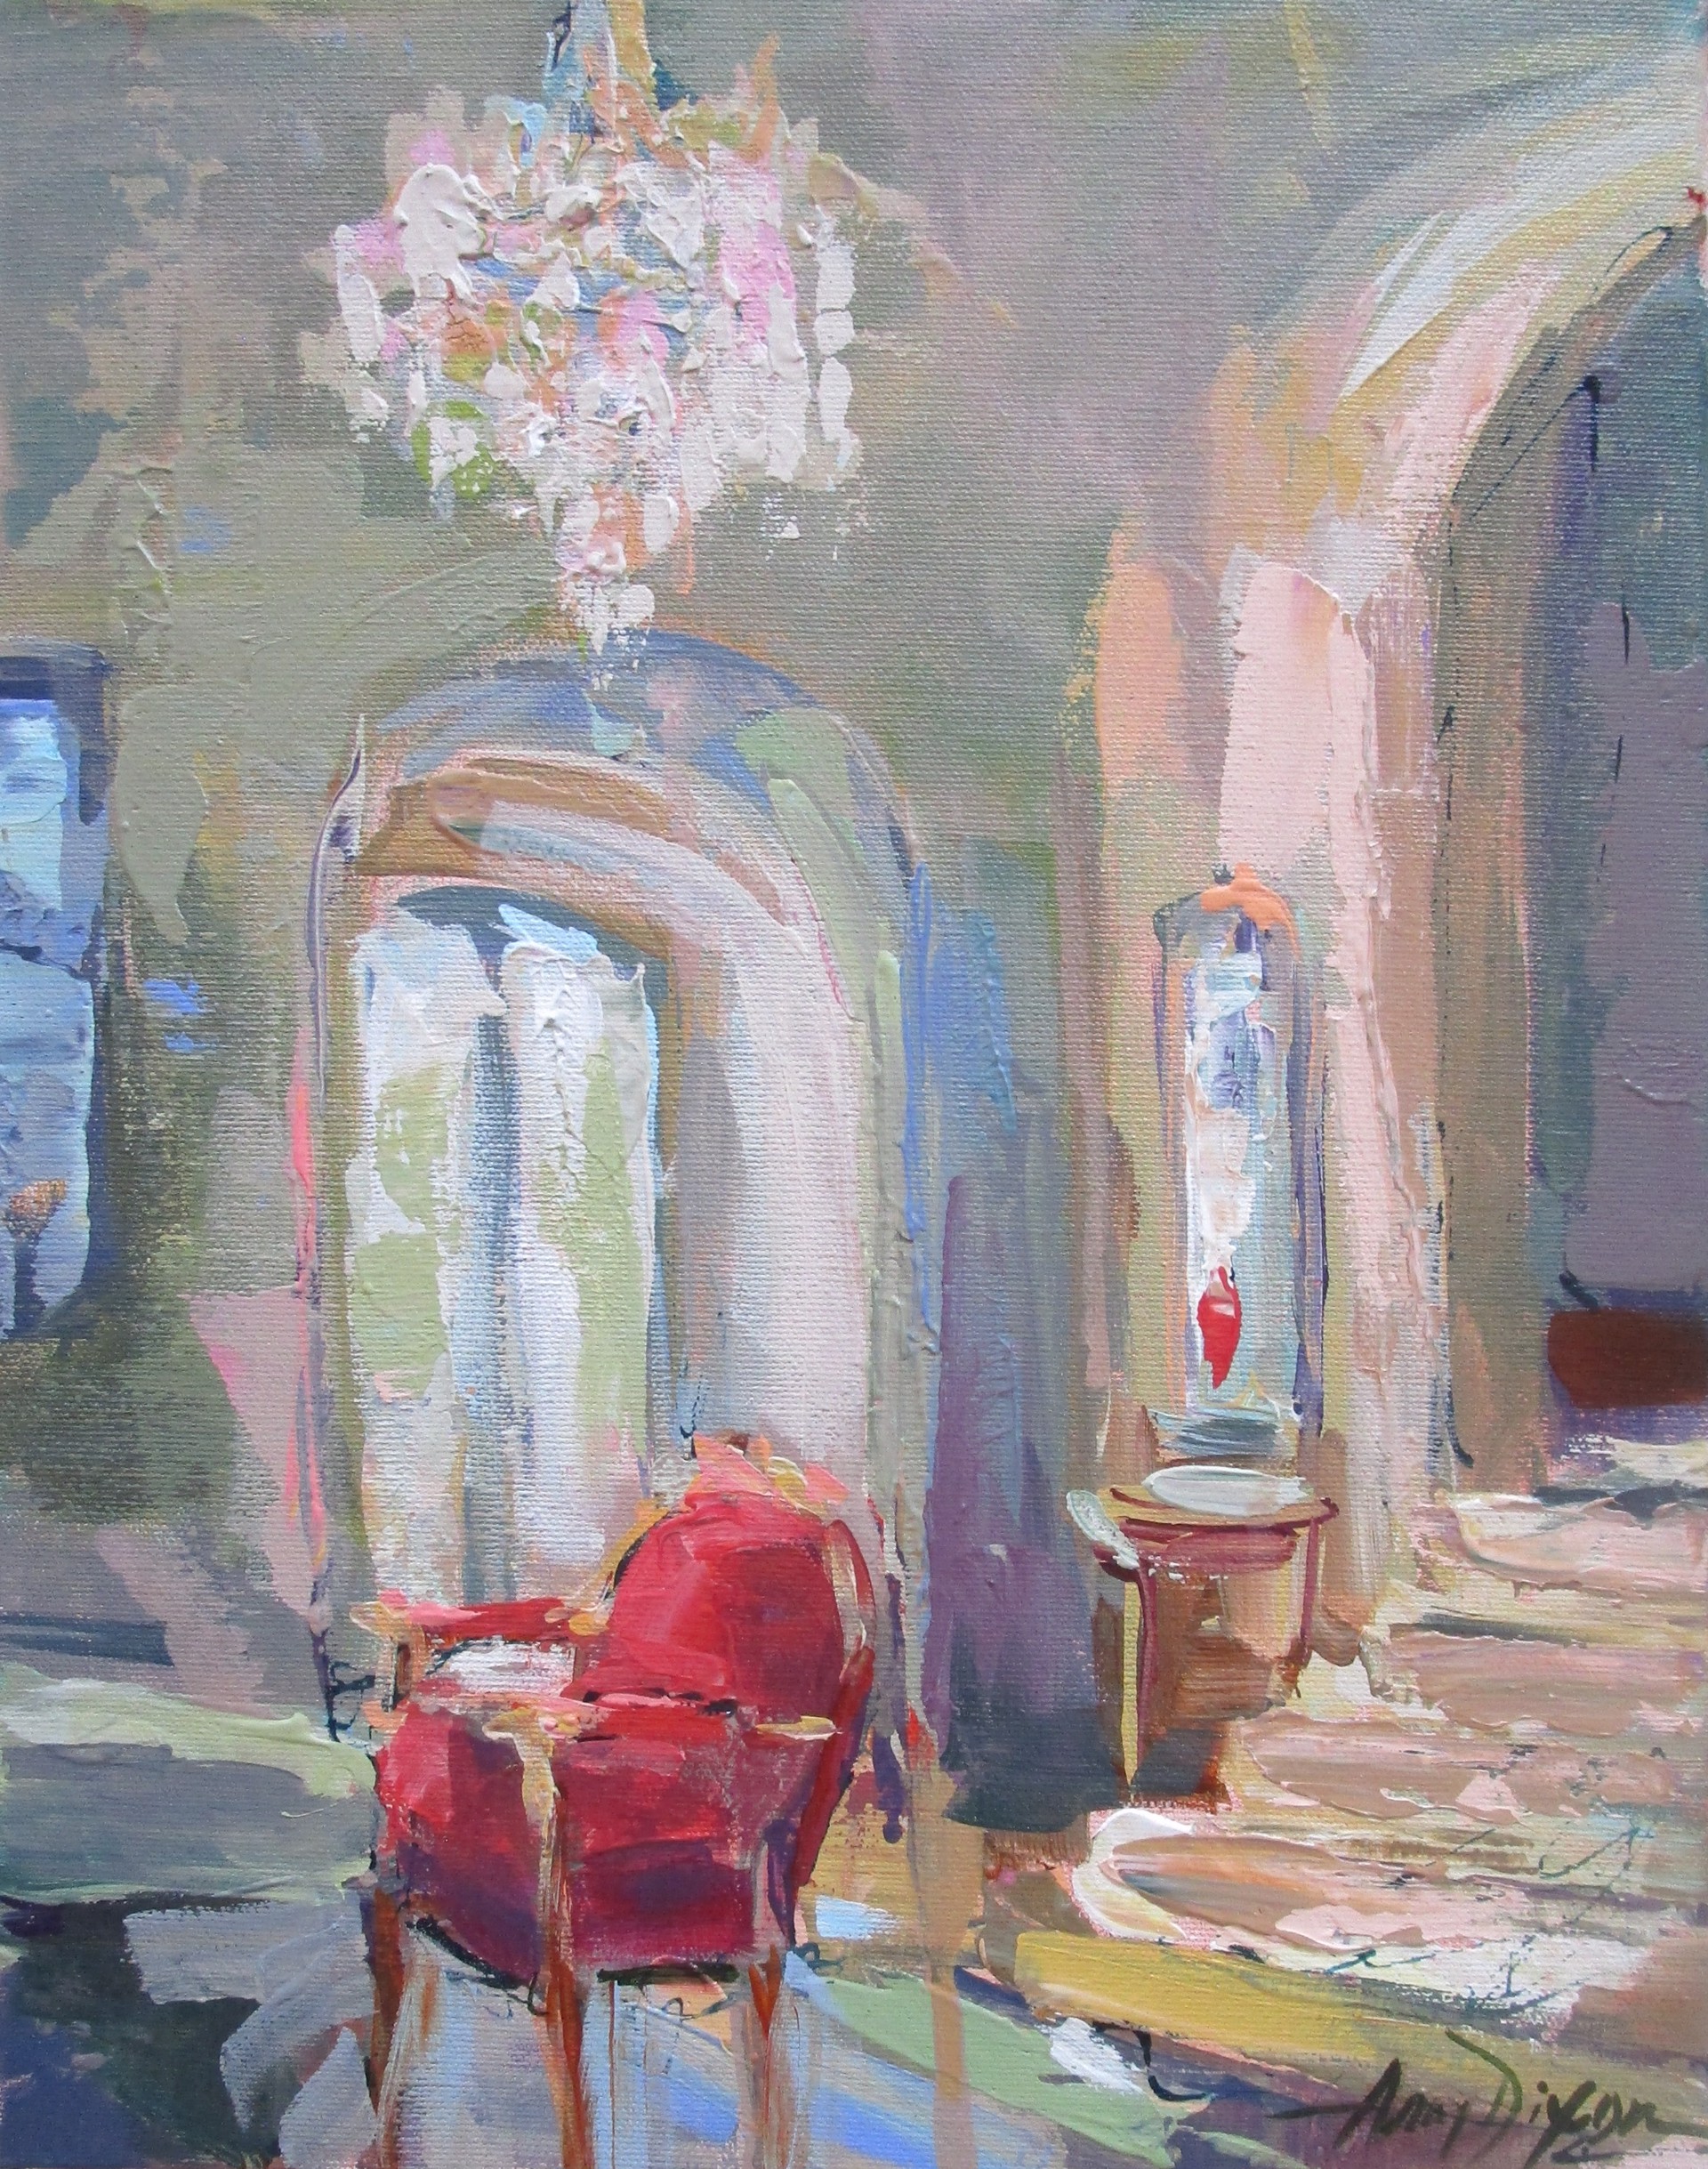 "French Interiors" original mixed media painting by Amy Dixon